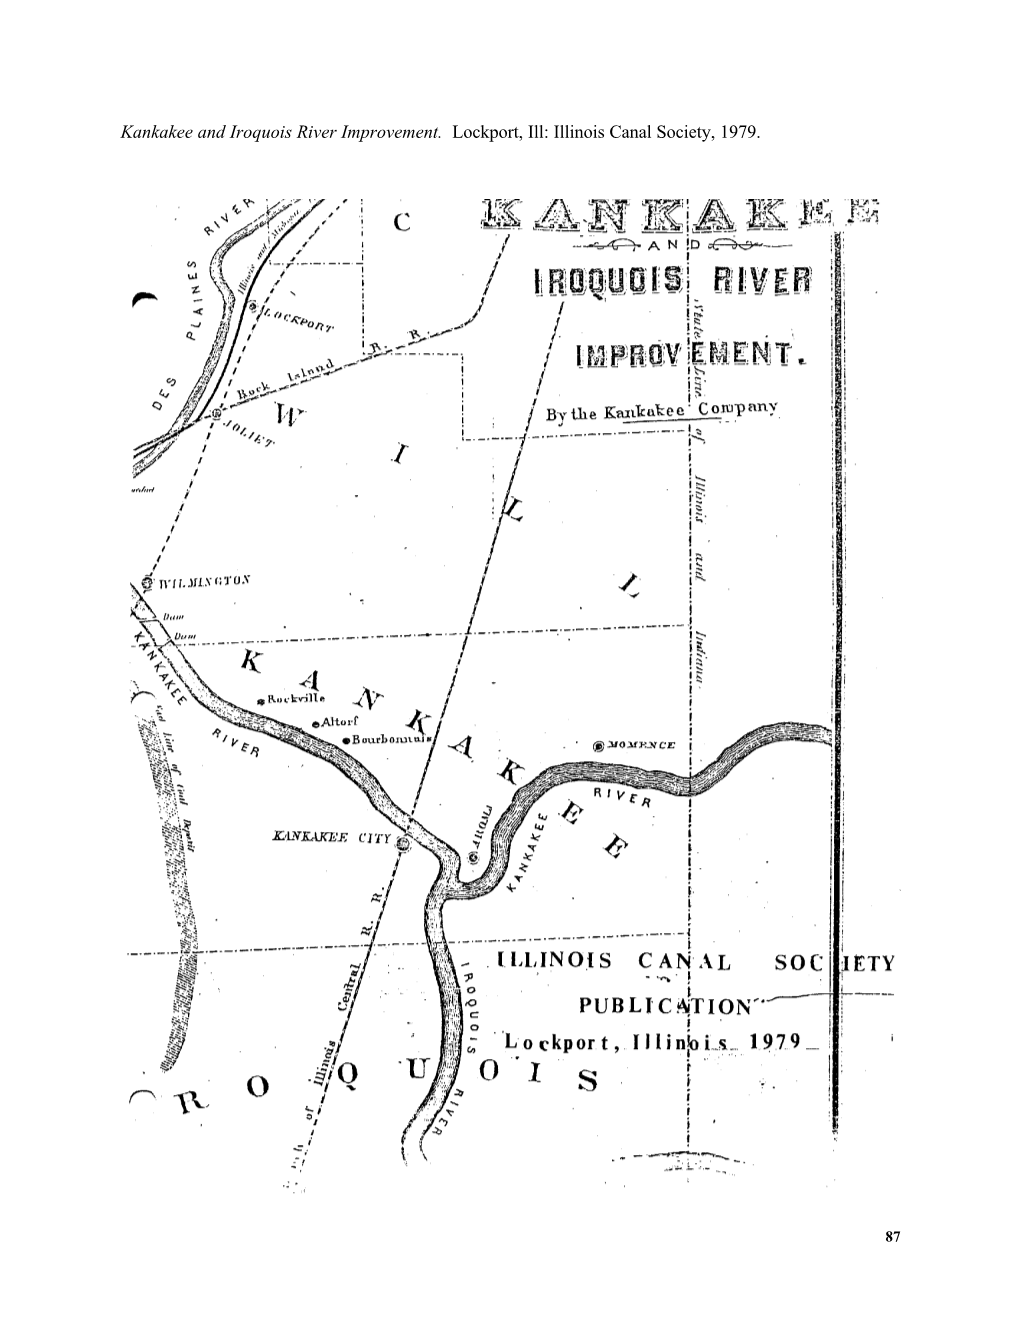 Kankakee and Iroquois River Improvement